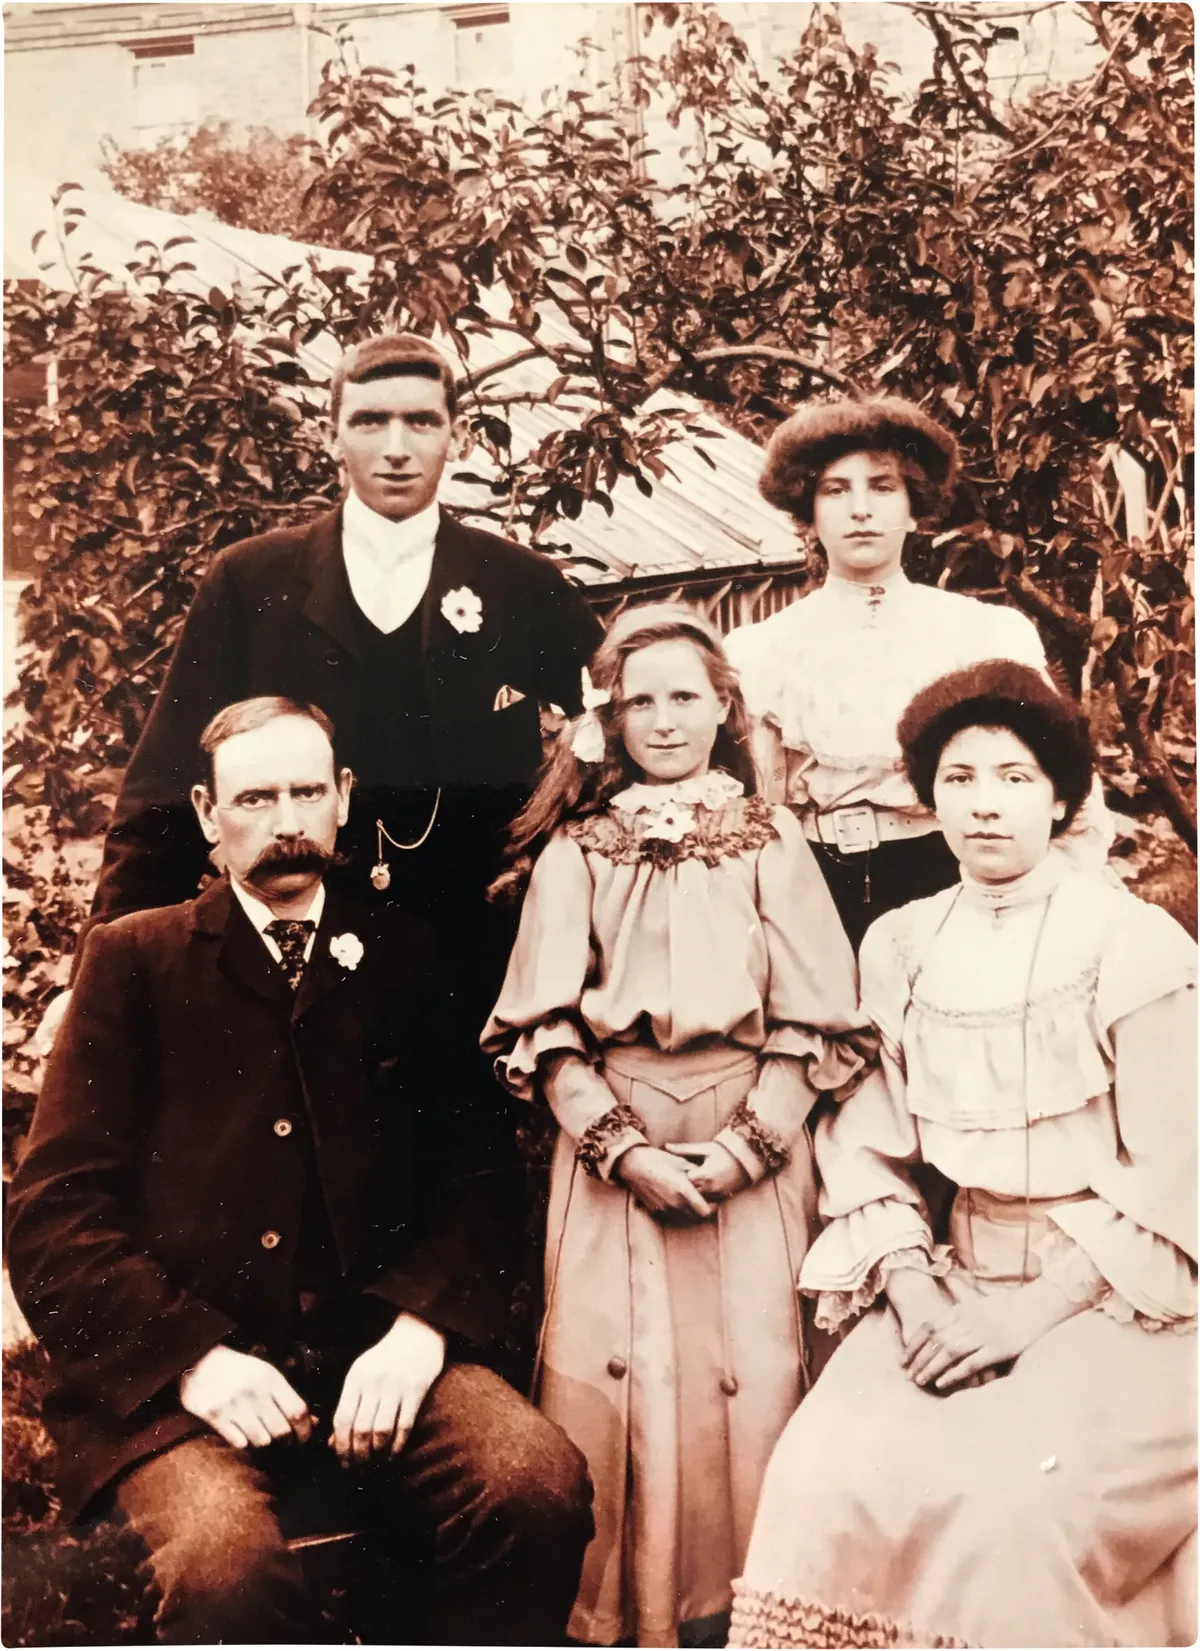 Black and white photograph of a little girl, a middle-aged man, two young women and a young man in Edwardian dress